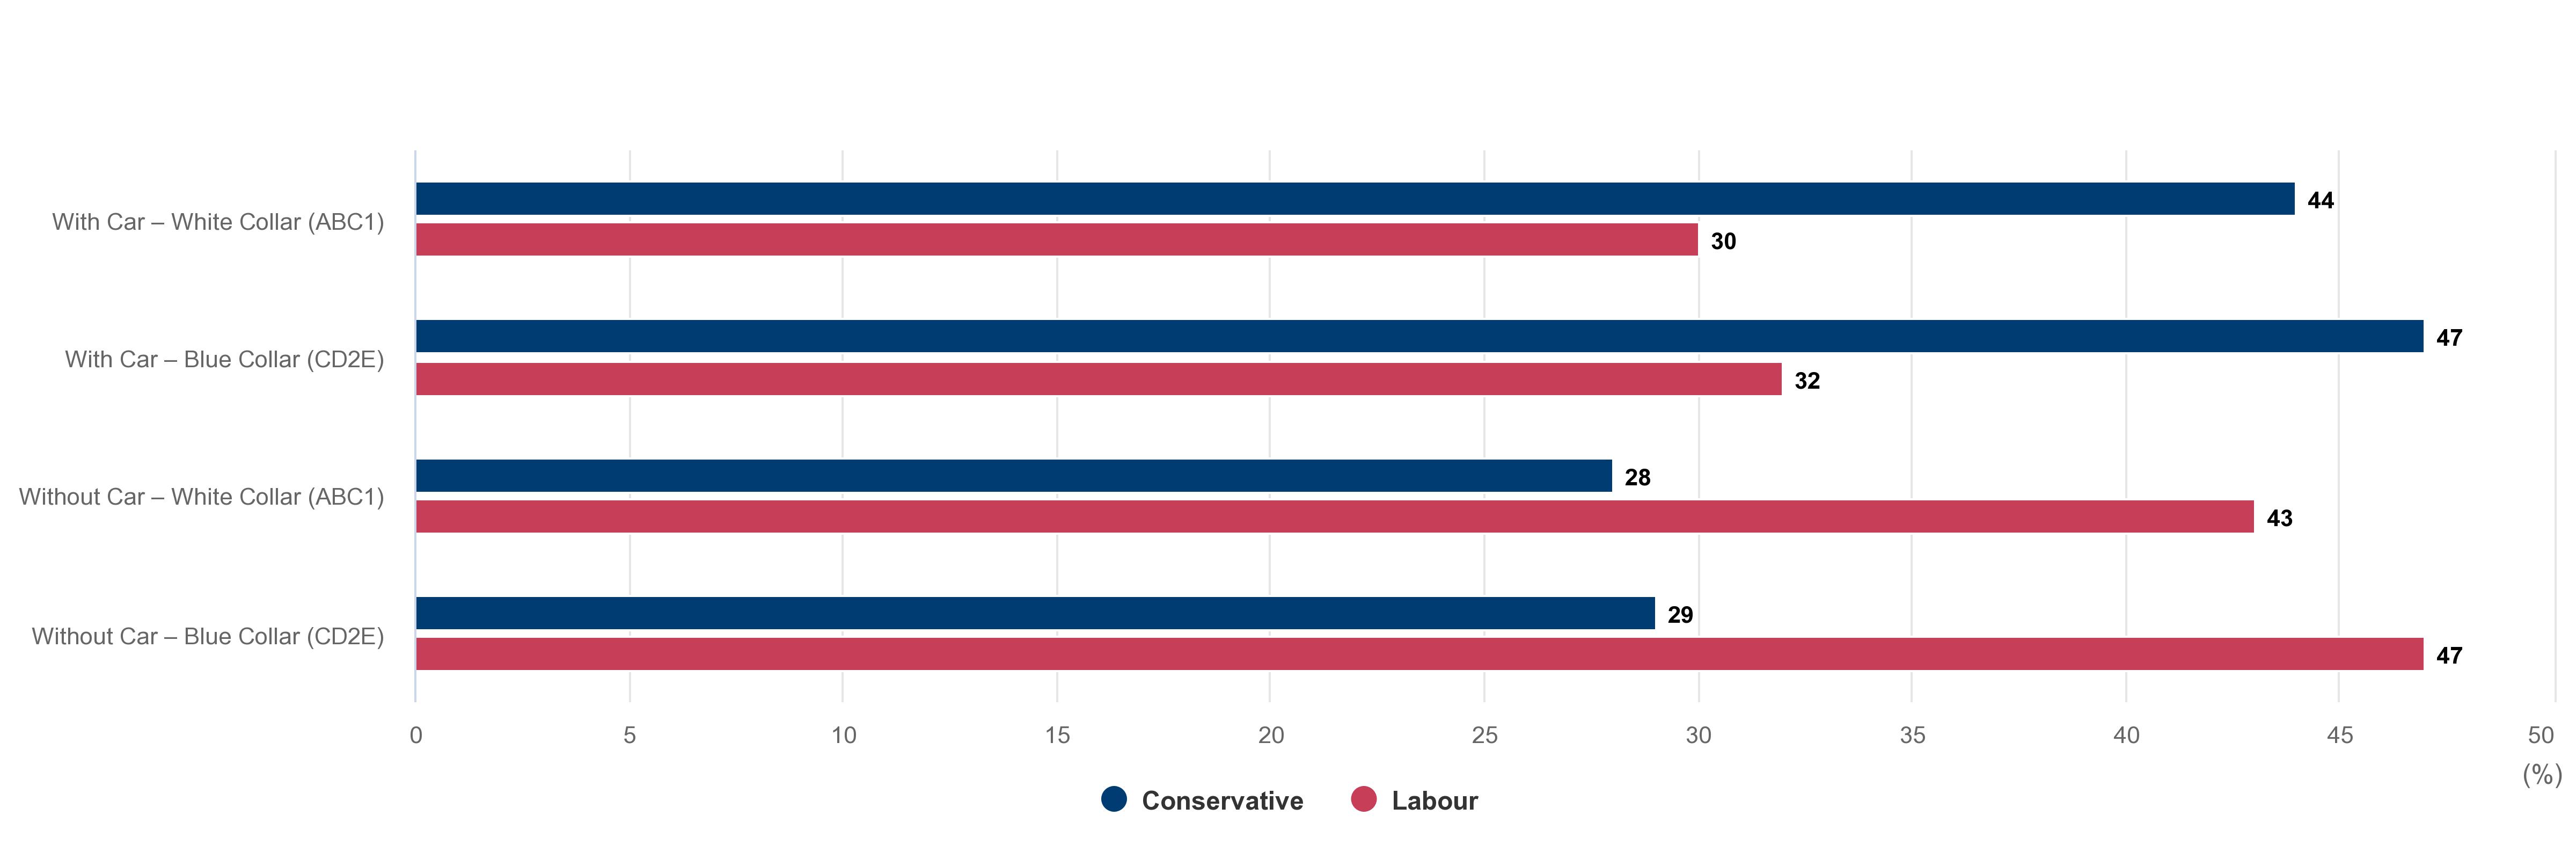 Voting intention by social class and car ownership